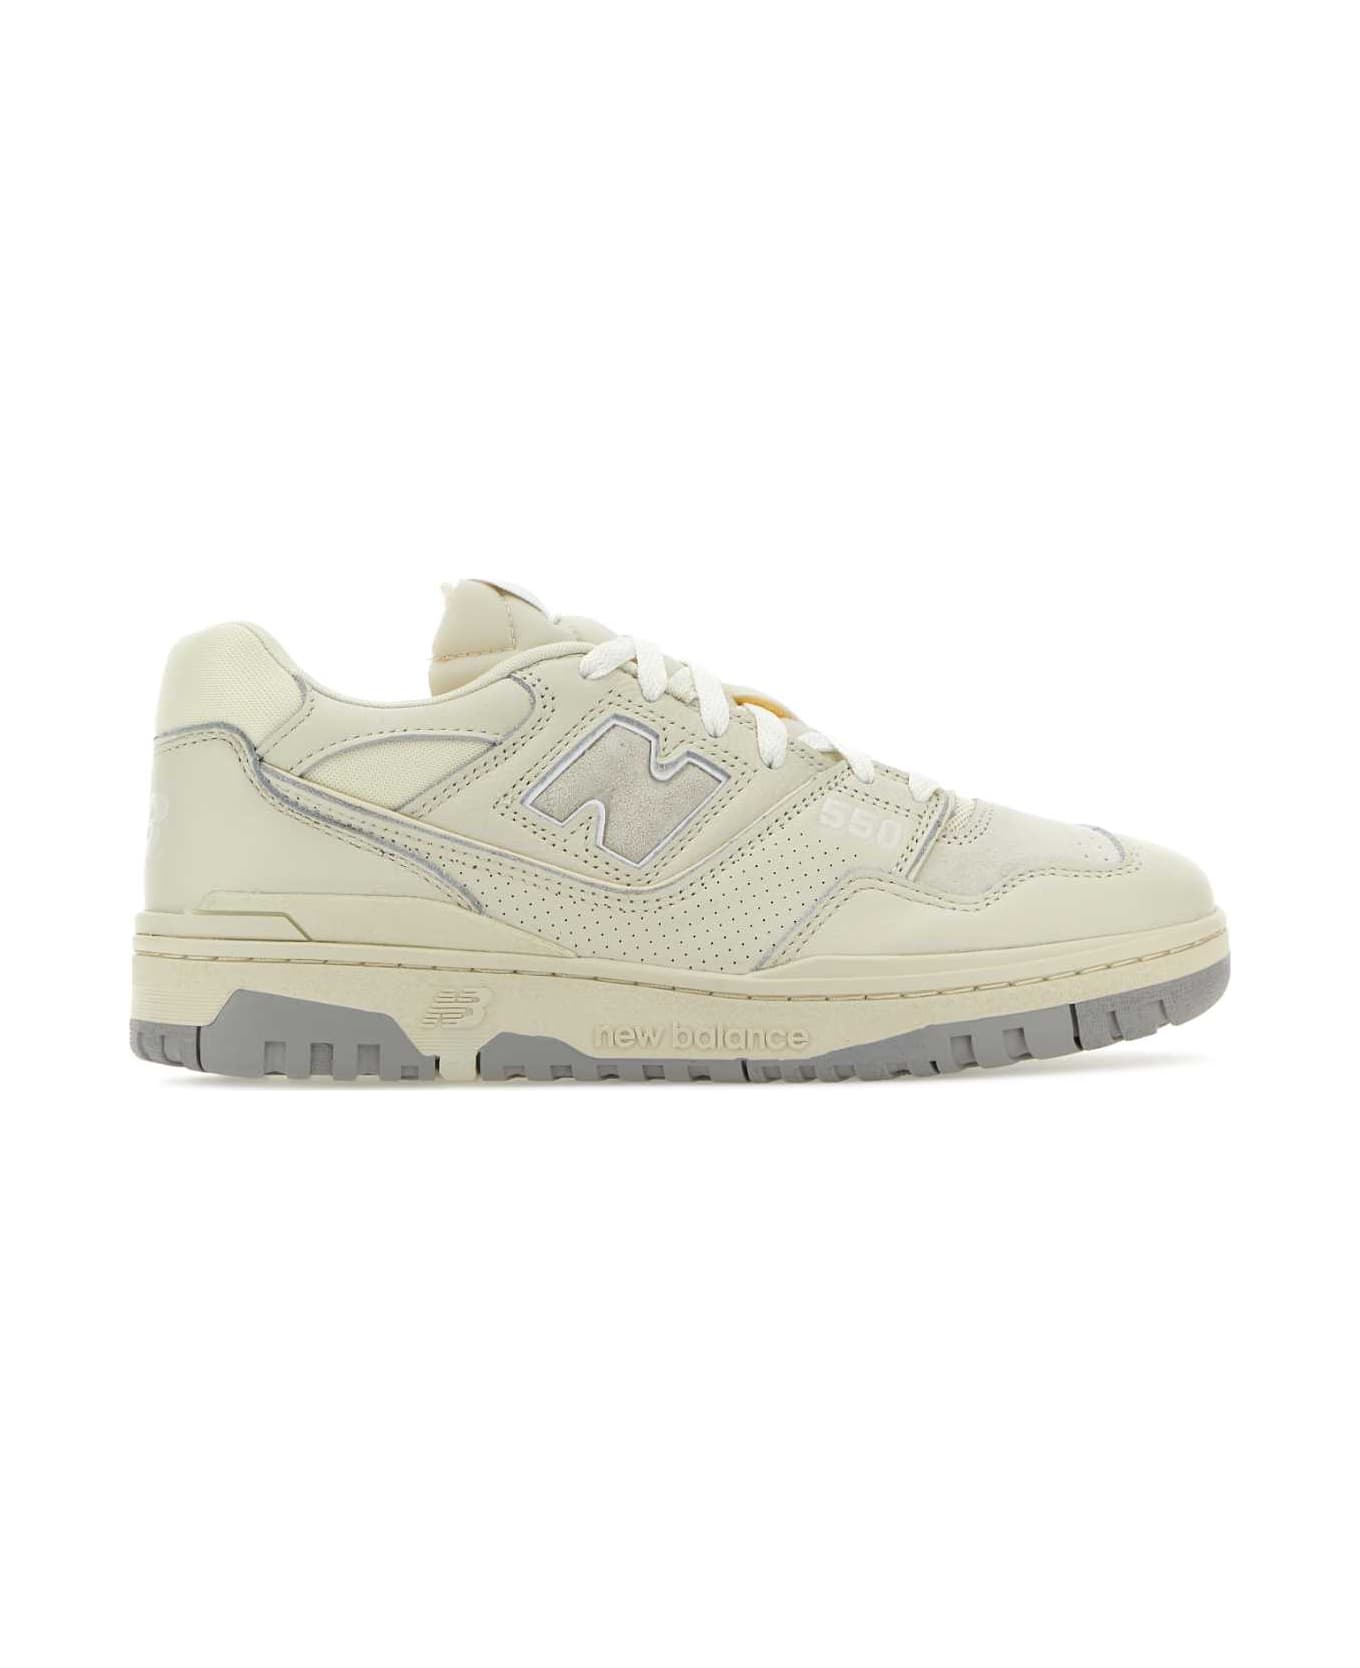 New Balance Sand Leather And Suede 550 Sneakers - TURTLEDOVE スニーカー